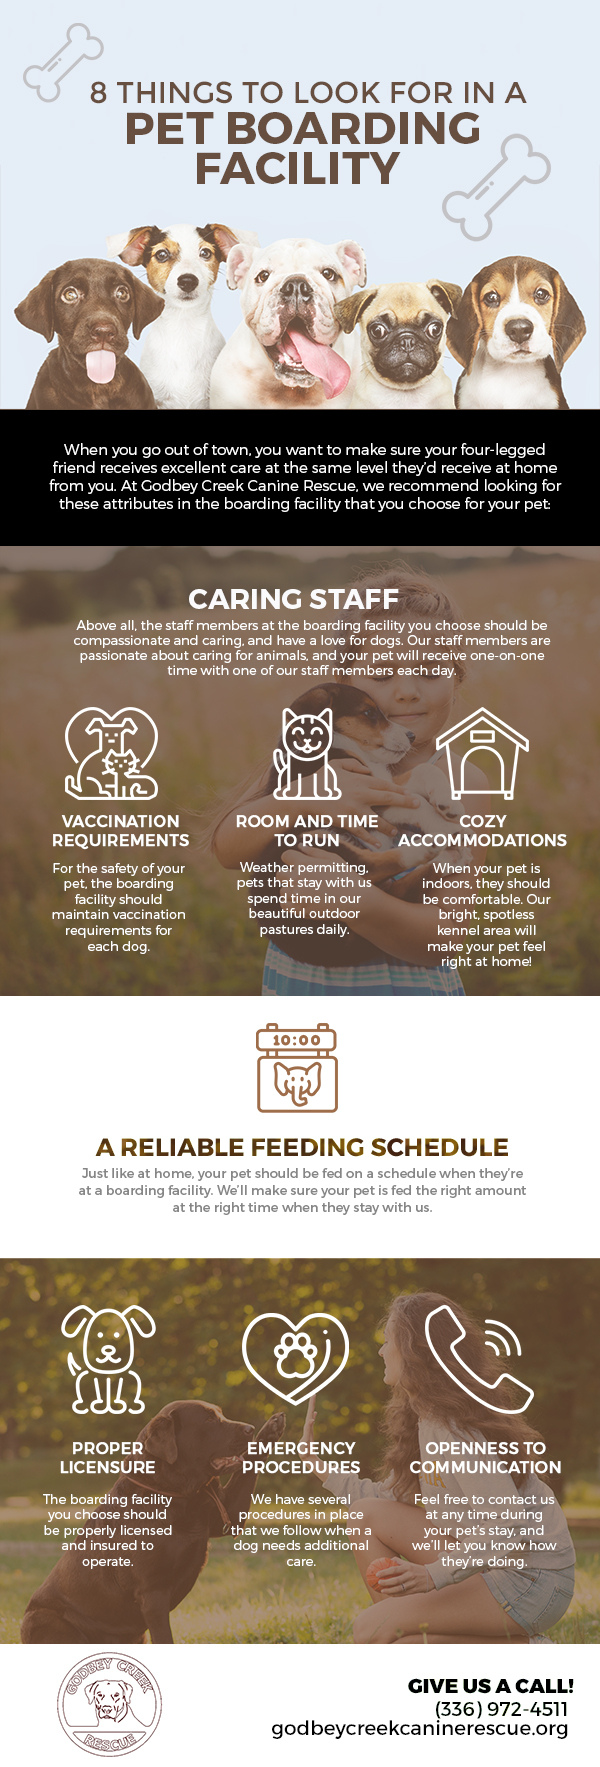 8 Things to Look for in a Pet Boarding Facility [infographic]